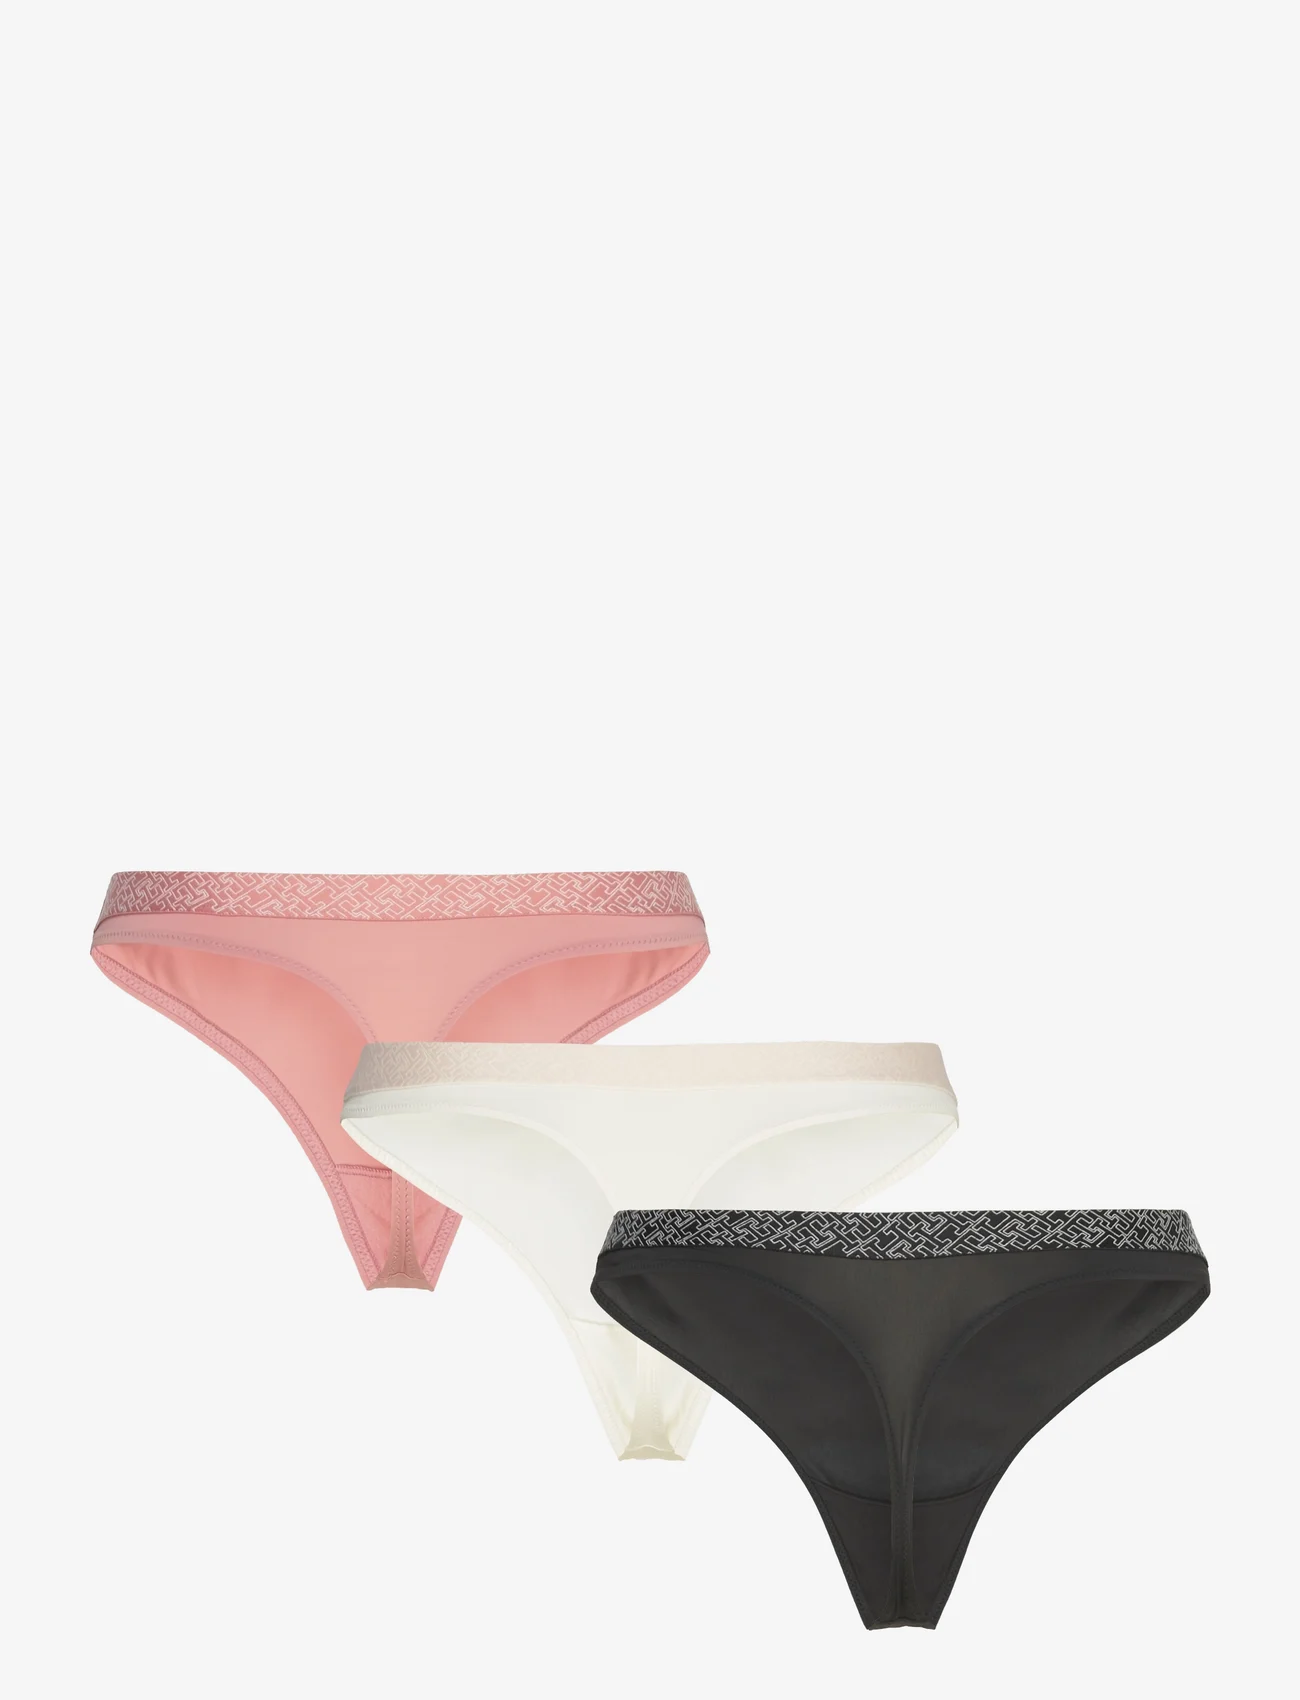 Tommy Hilfiger - 3P THONG - strings - teaberry blossom/ivory/black - 1